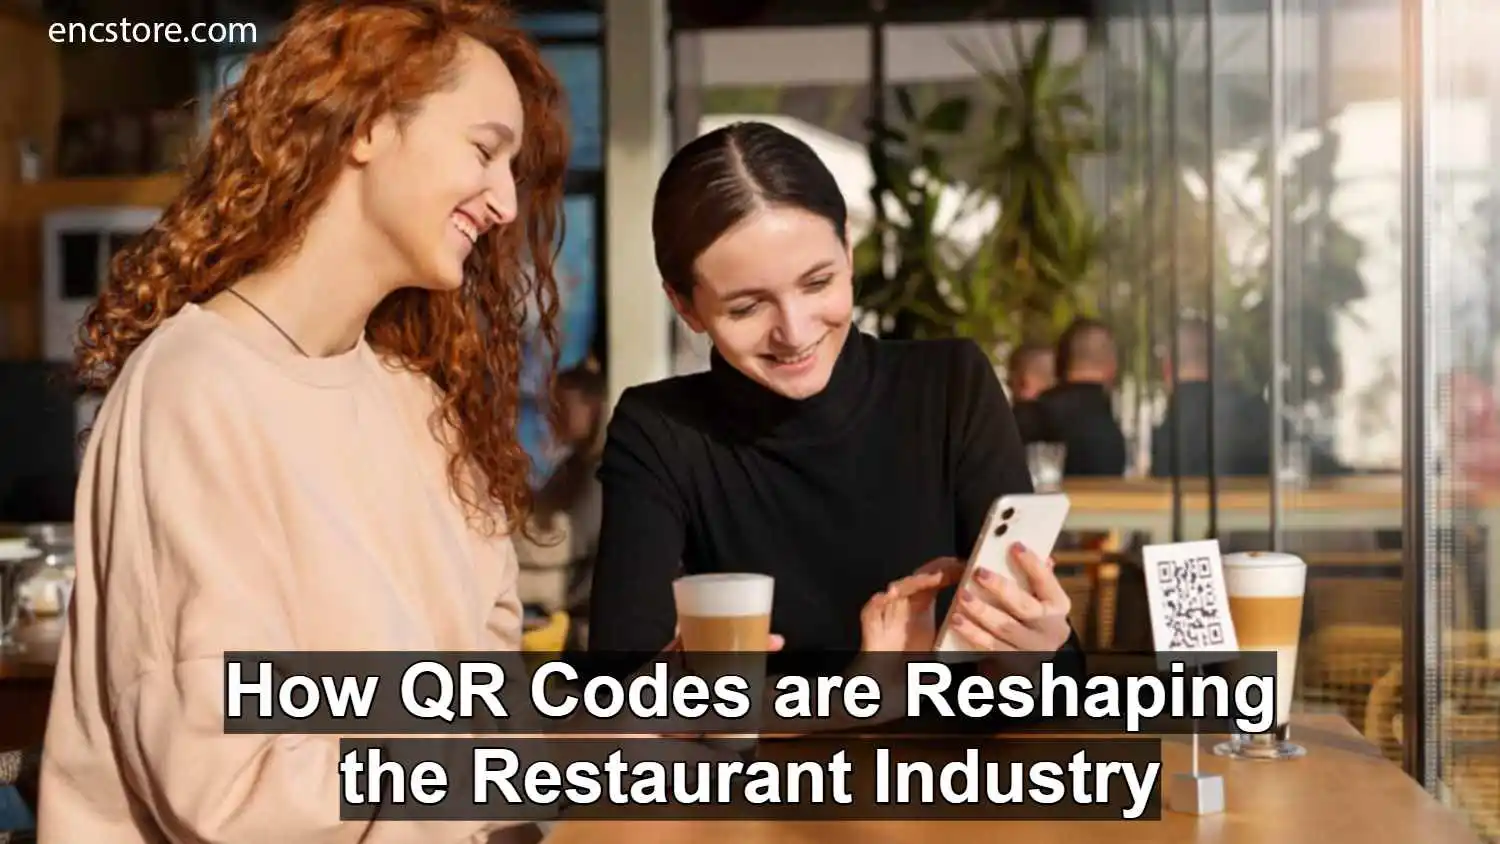 How QR Codes are Reshaping the Restaurant Industry